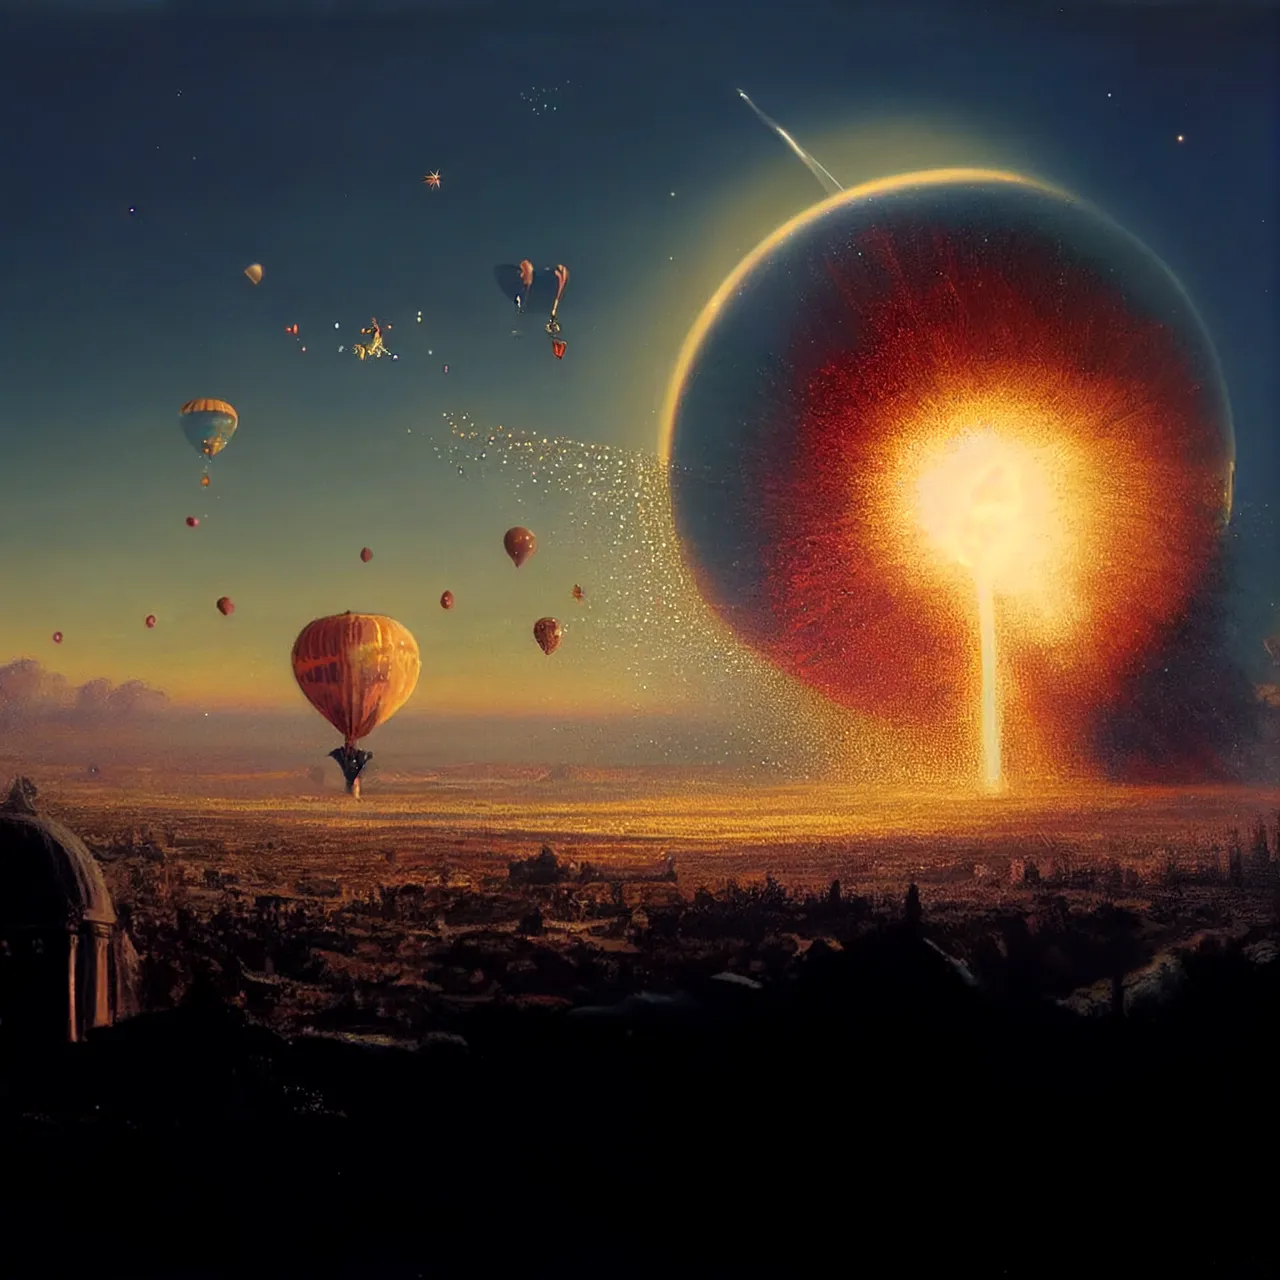 Ed_Privat_atomic_explosion_spreading_balloons_sweets_and_glitte_655ca7f3-12dc-494c-9e57-e0551c574aad.png